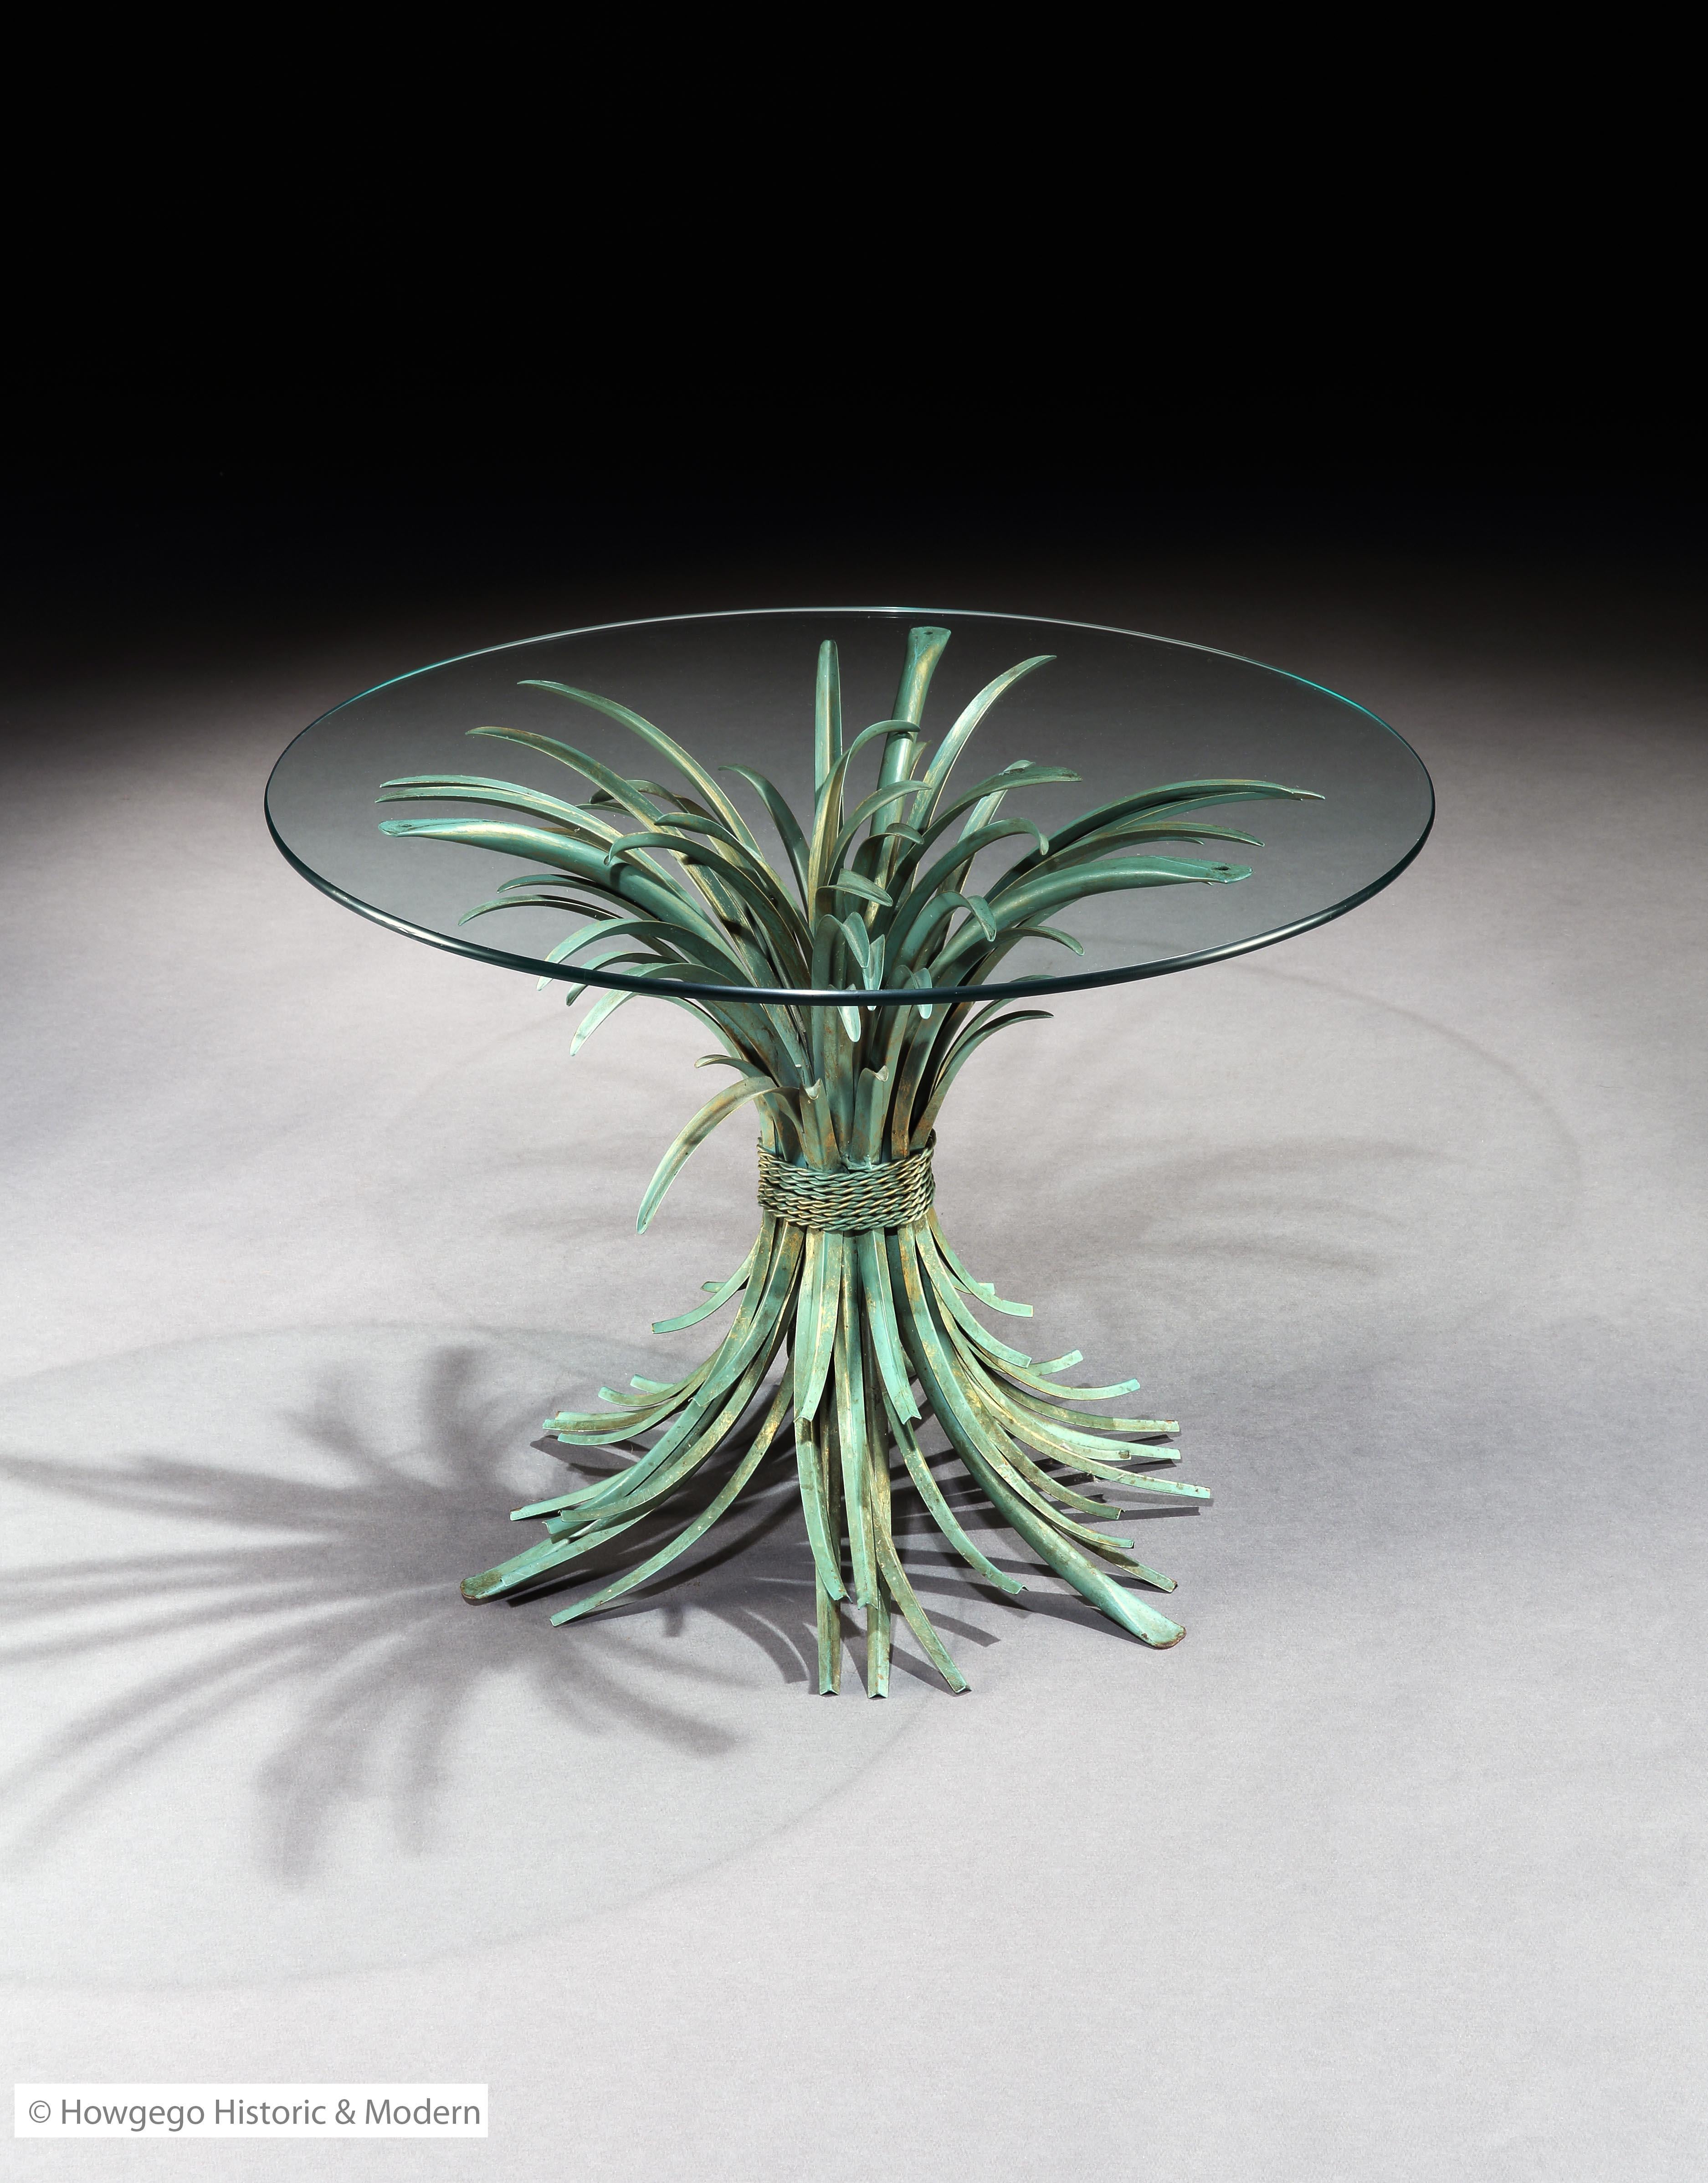 - Elegant Mid-Century Modern sofa or occasional table
- Most likely Maison Bagues, predating the infamous Coco Chanel sheaf of wheat table reputedly given to her by Salvador Dali which was probably inspired by this model
- Classic uncluttered fern